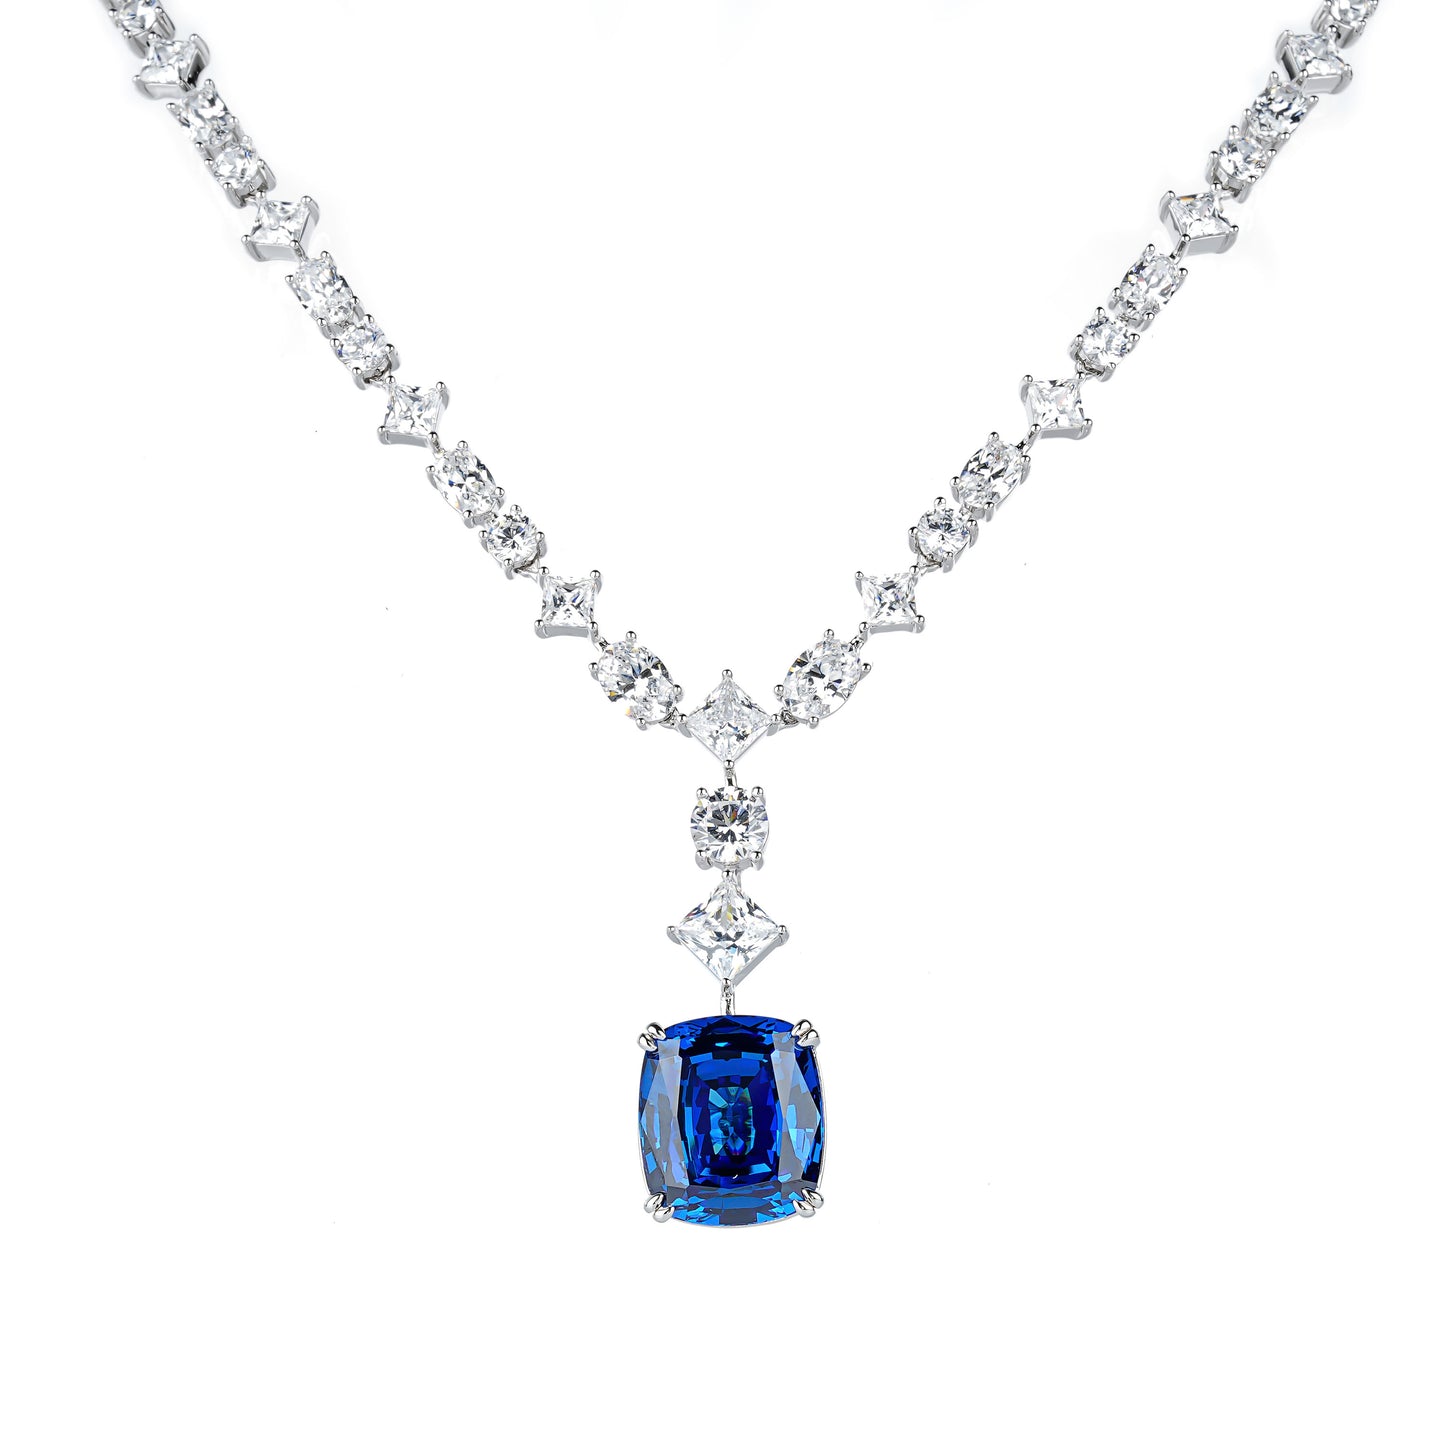 Limited High jewelry collection: Modern Exquisite Blue cube Tennis Necklace